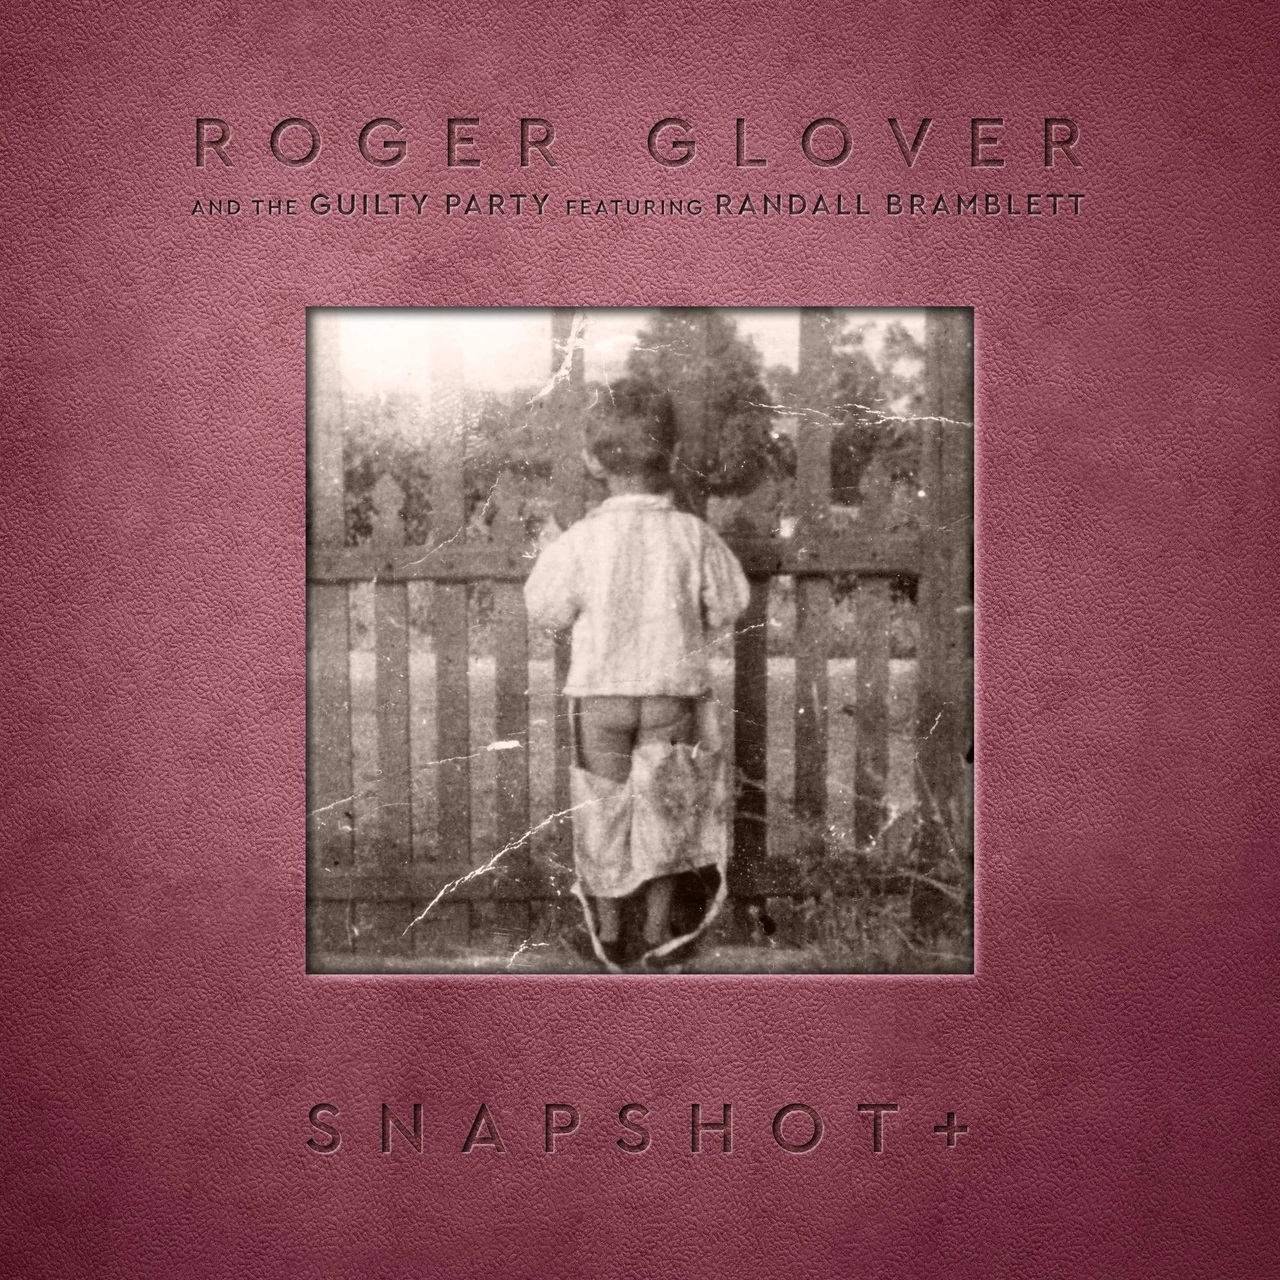 Roger Glover & The Guilty Party – Snapshot+ (Remastered) (2002/2021) [FLAC 24bit/44,1kHz]